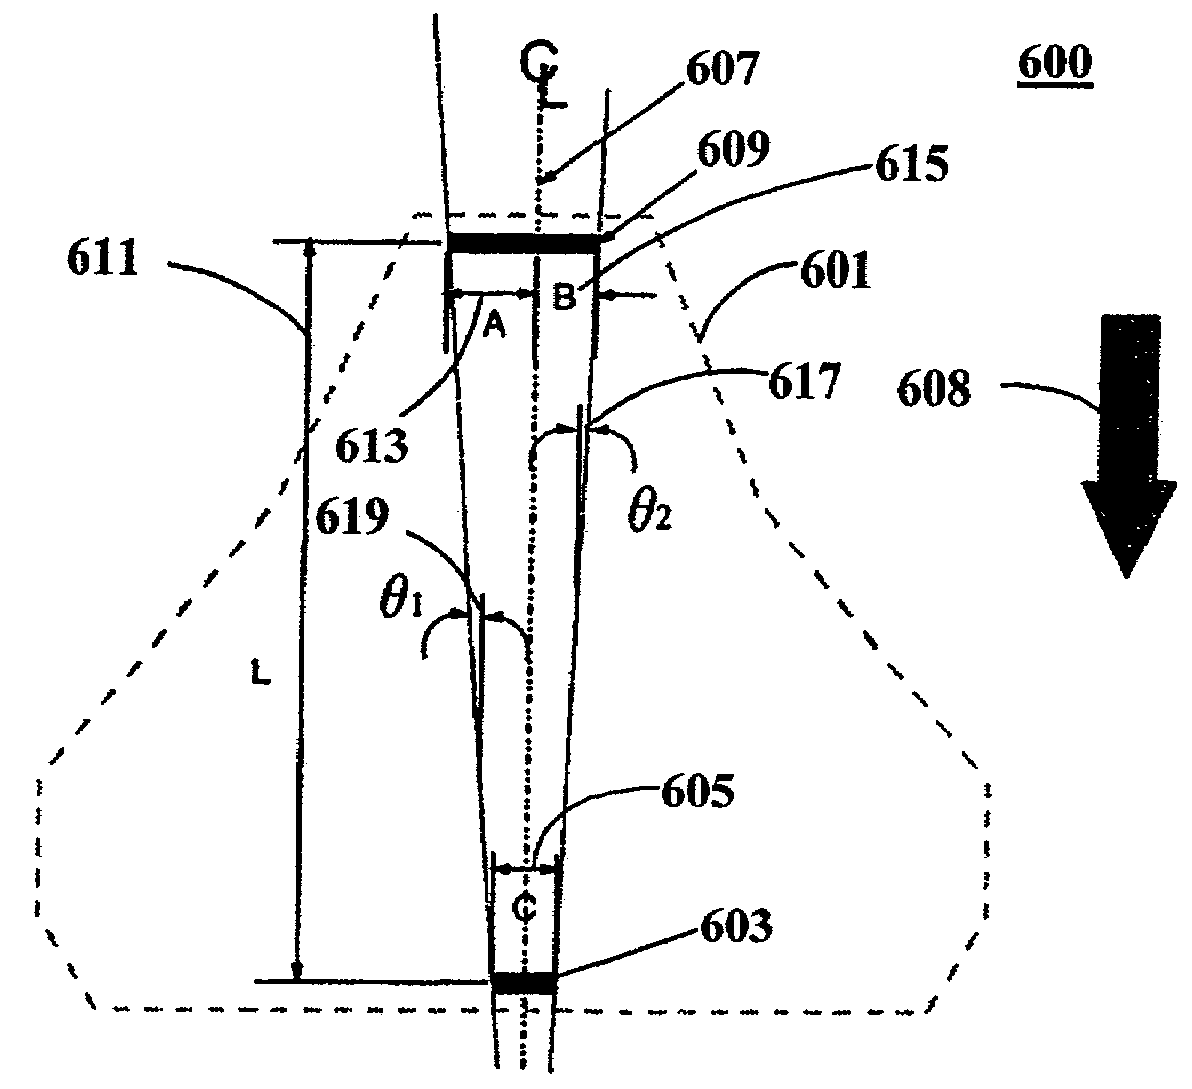 Apparatus for look-ahead thermal sensing in a data storage device